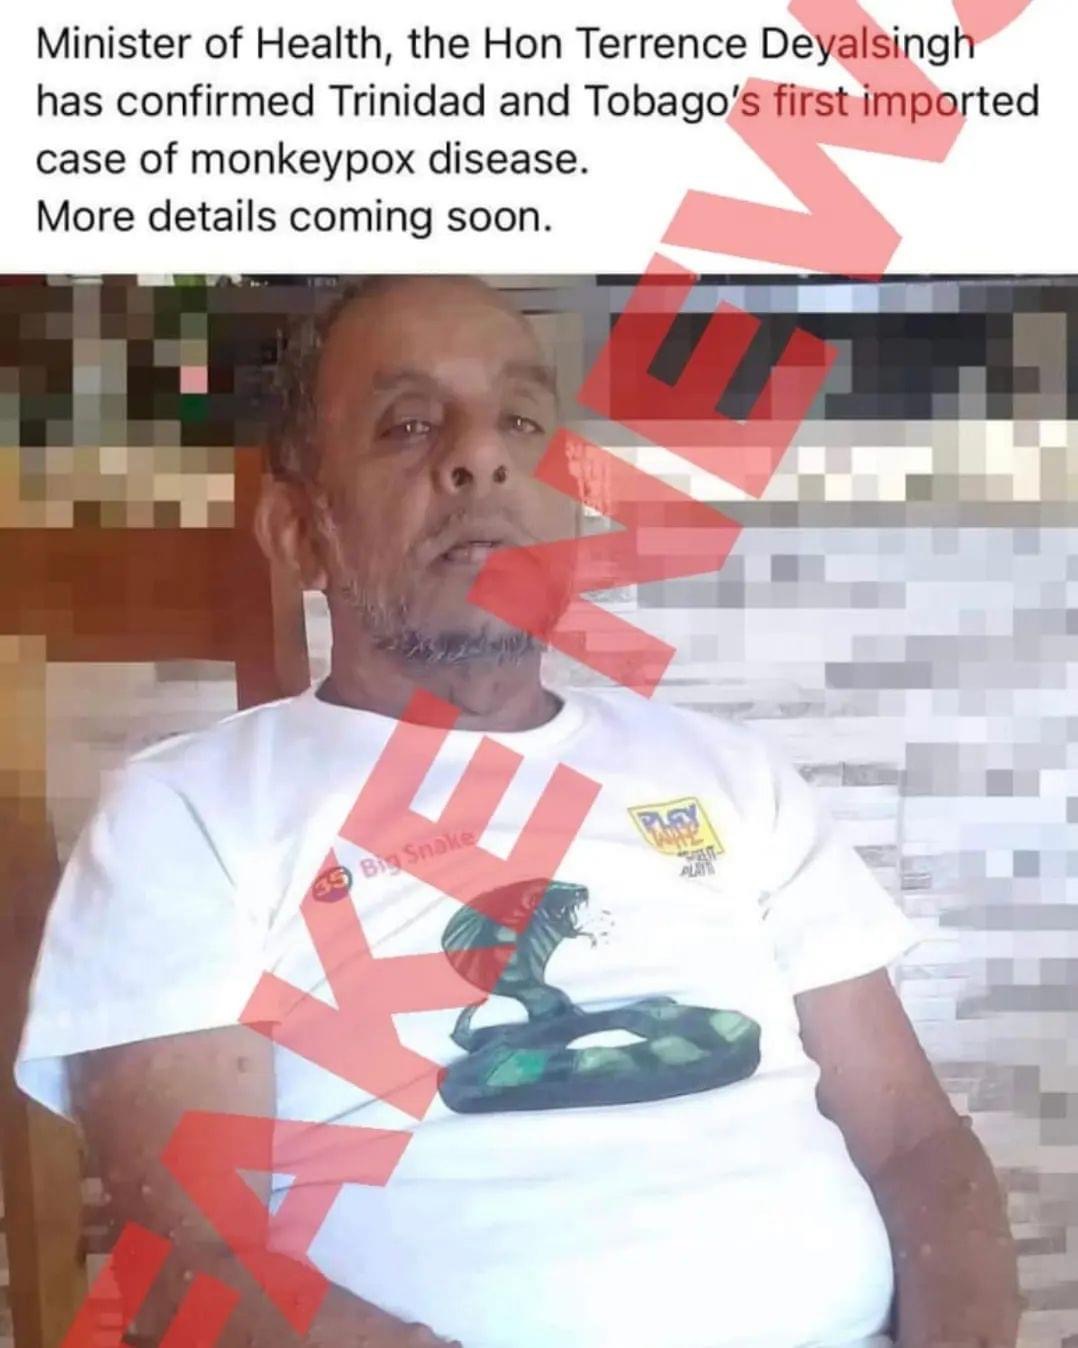 MoH slams claims of MonkeyPox in viral photo as fake news